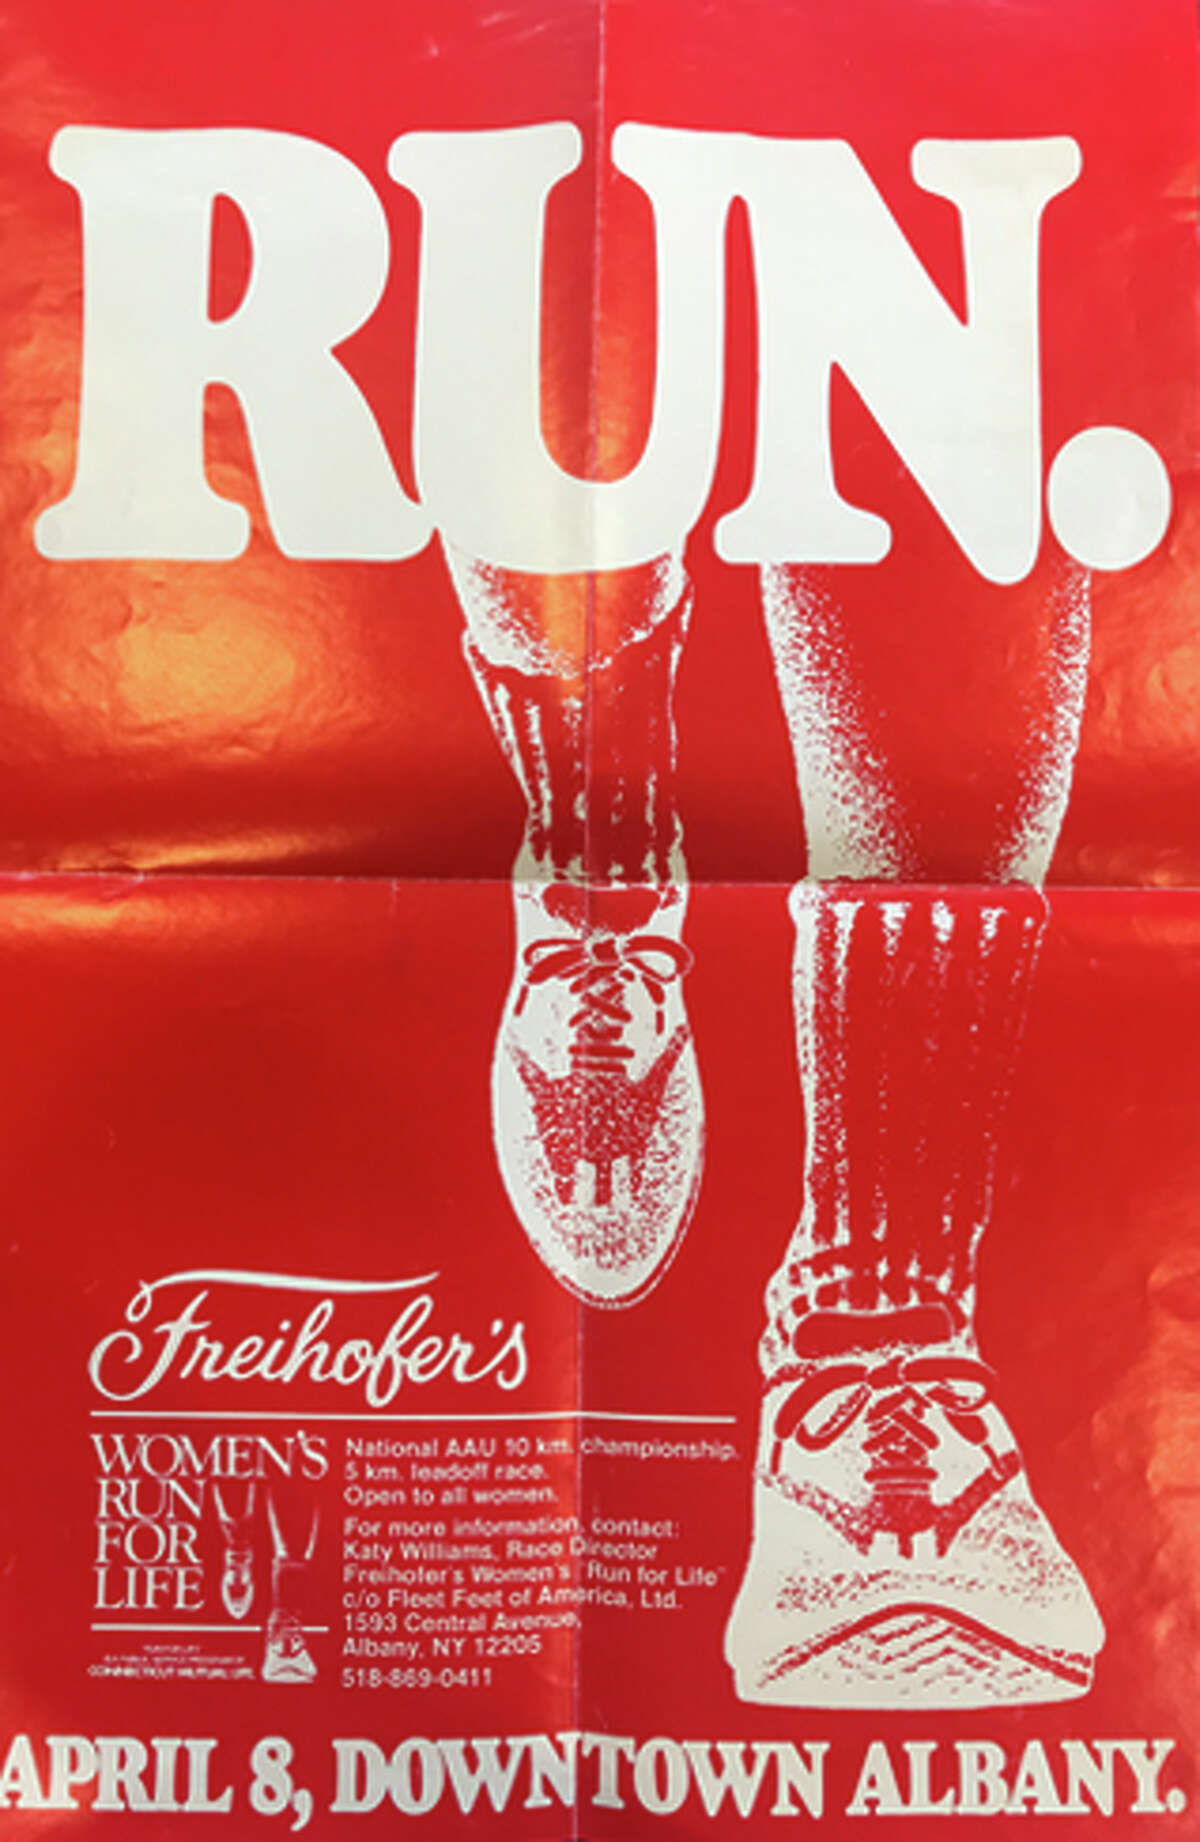 1979: For the first two years of its existence, the Freihofer's Run for Woman was referred to as the "Freihofer's Run for Life." Its first edition was held on April 8 where it hosted the country's first Women’s 10K (AAU) National Road Race Championship, a designation retained through 1988. The 1979 race drew 503 registrants, 260 of whom participated in a Leadoff 5K. The winner of the 10K AAU National Championship was Karin Von Berg, Ithaca, N.Y. (34:26) and Nina Kuscik, a pioneer in women's road running, crossed the line first in the masters (40+) division of the 10K in 37:42. The 5K winner was Martha Swatt, Johnstown, N.Y.